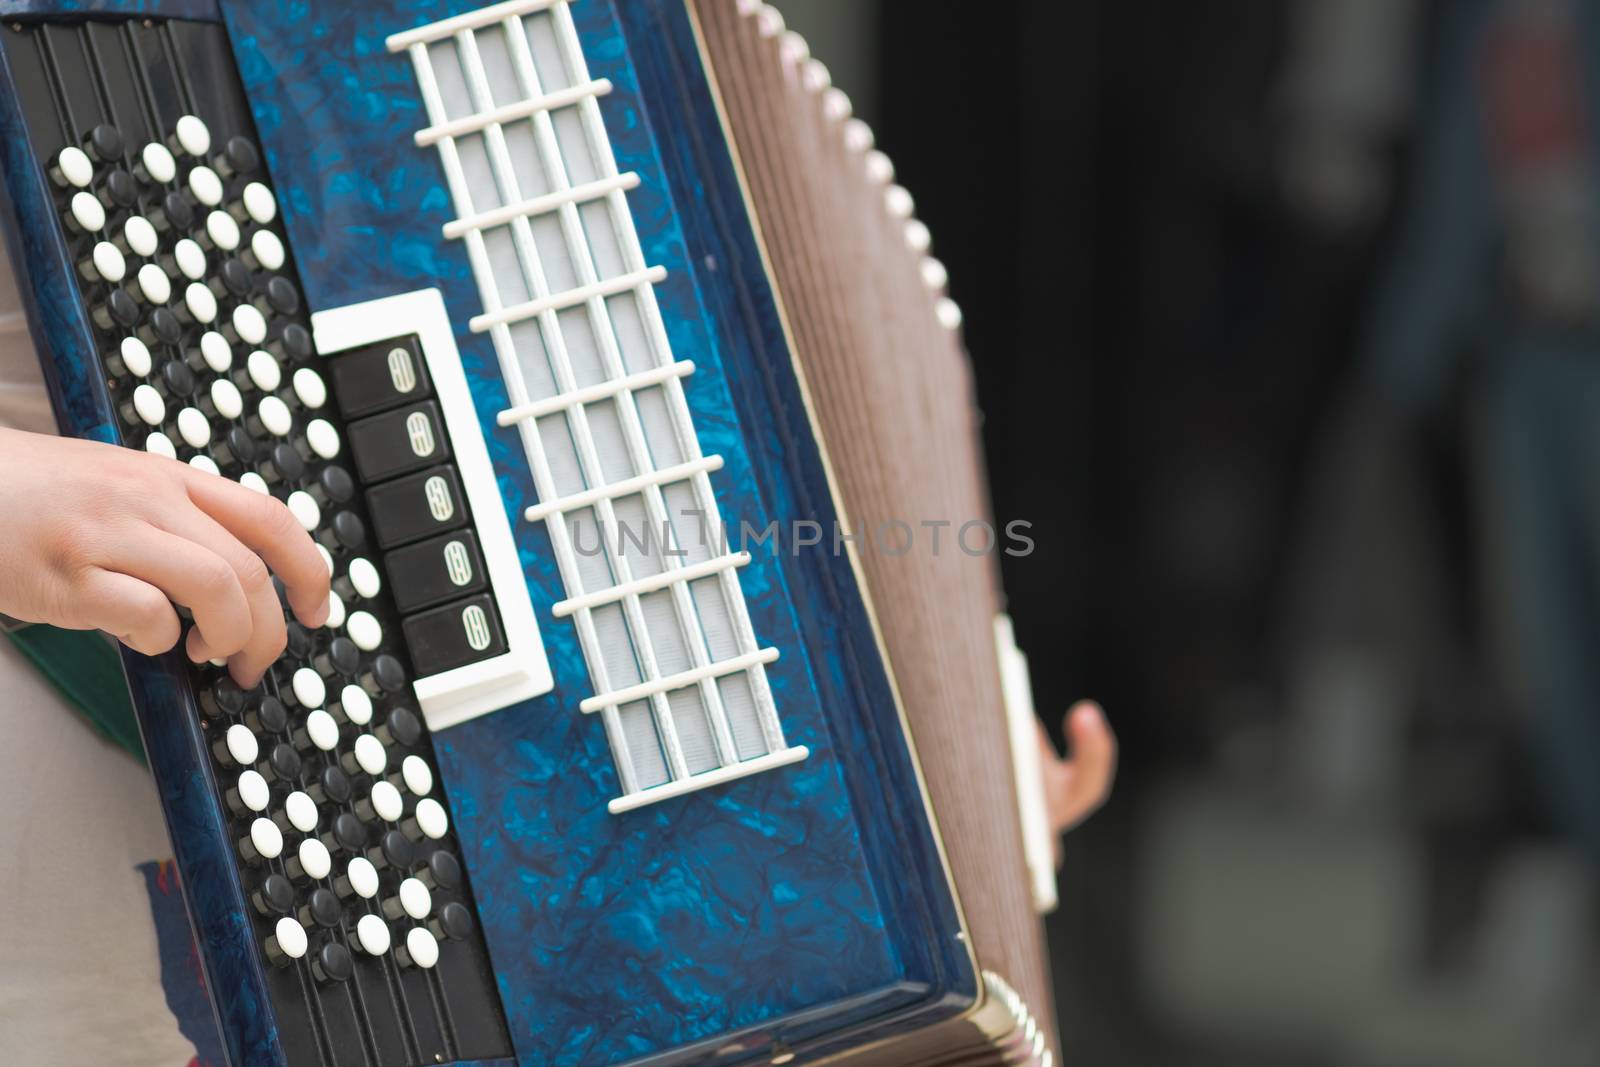 Accordion in the hands of a musician, close-up view. Street music image, busker playing a melodeon